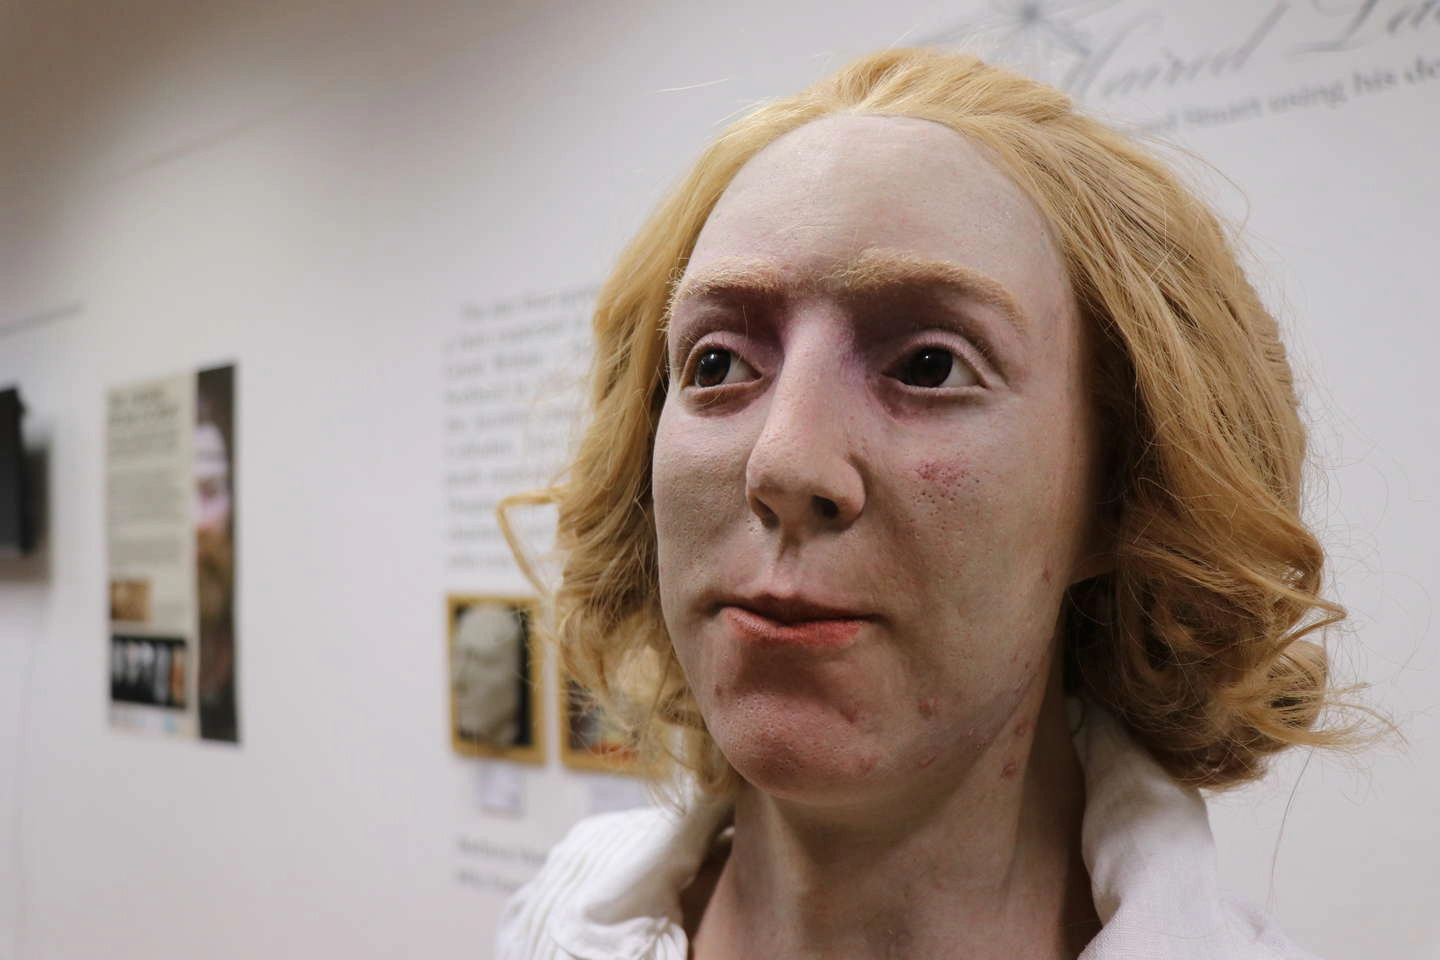 University of Dundee recreates Bonnie Prince Charlie’s face from death masks